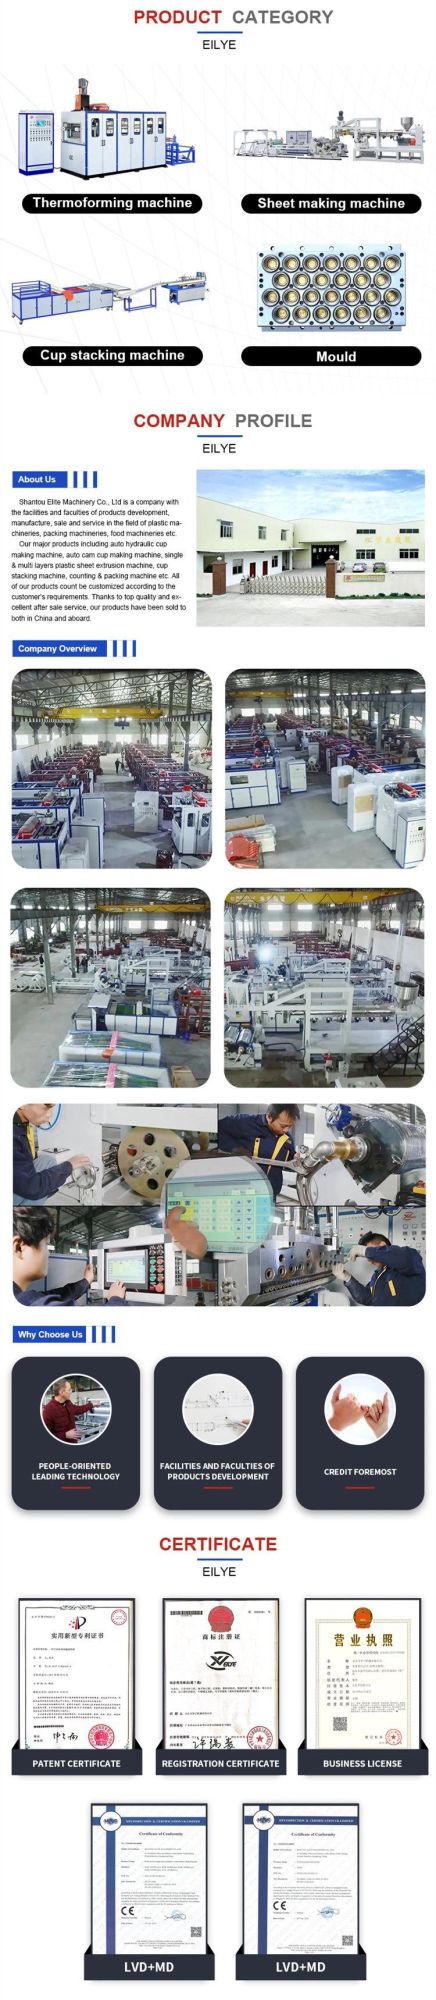 Three-Stations Forming Cutting Station Thermoforming Machine